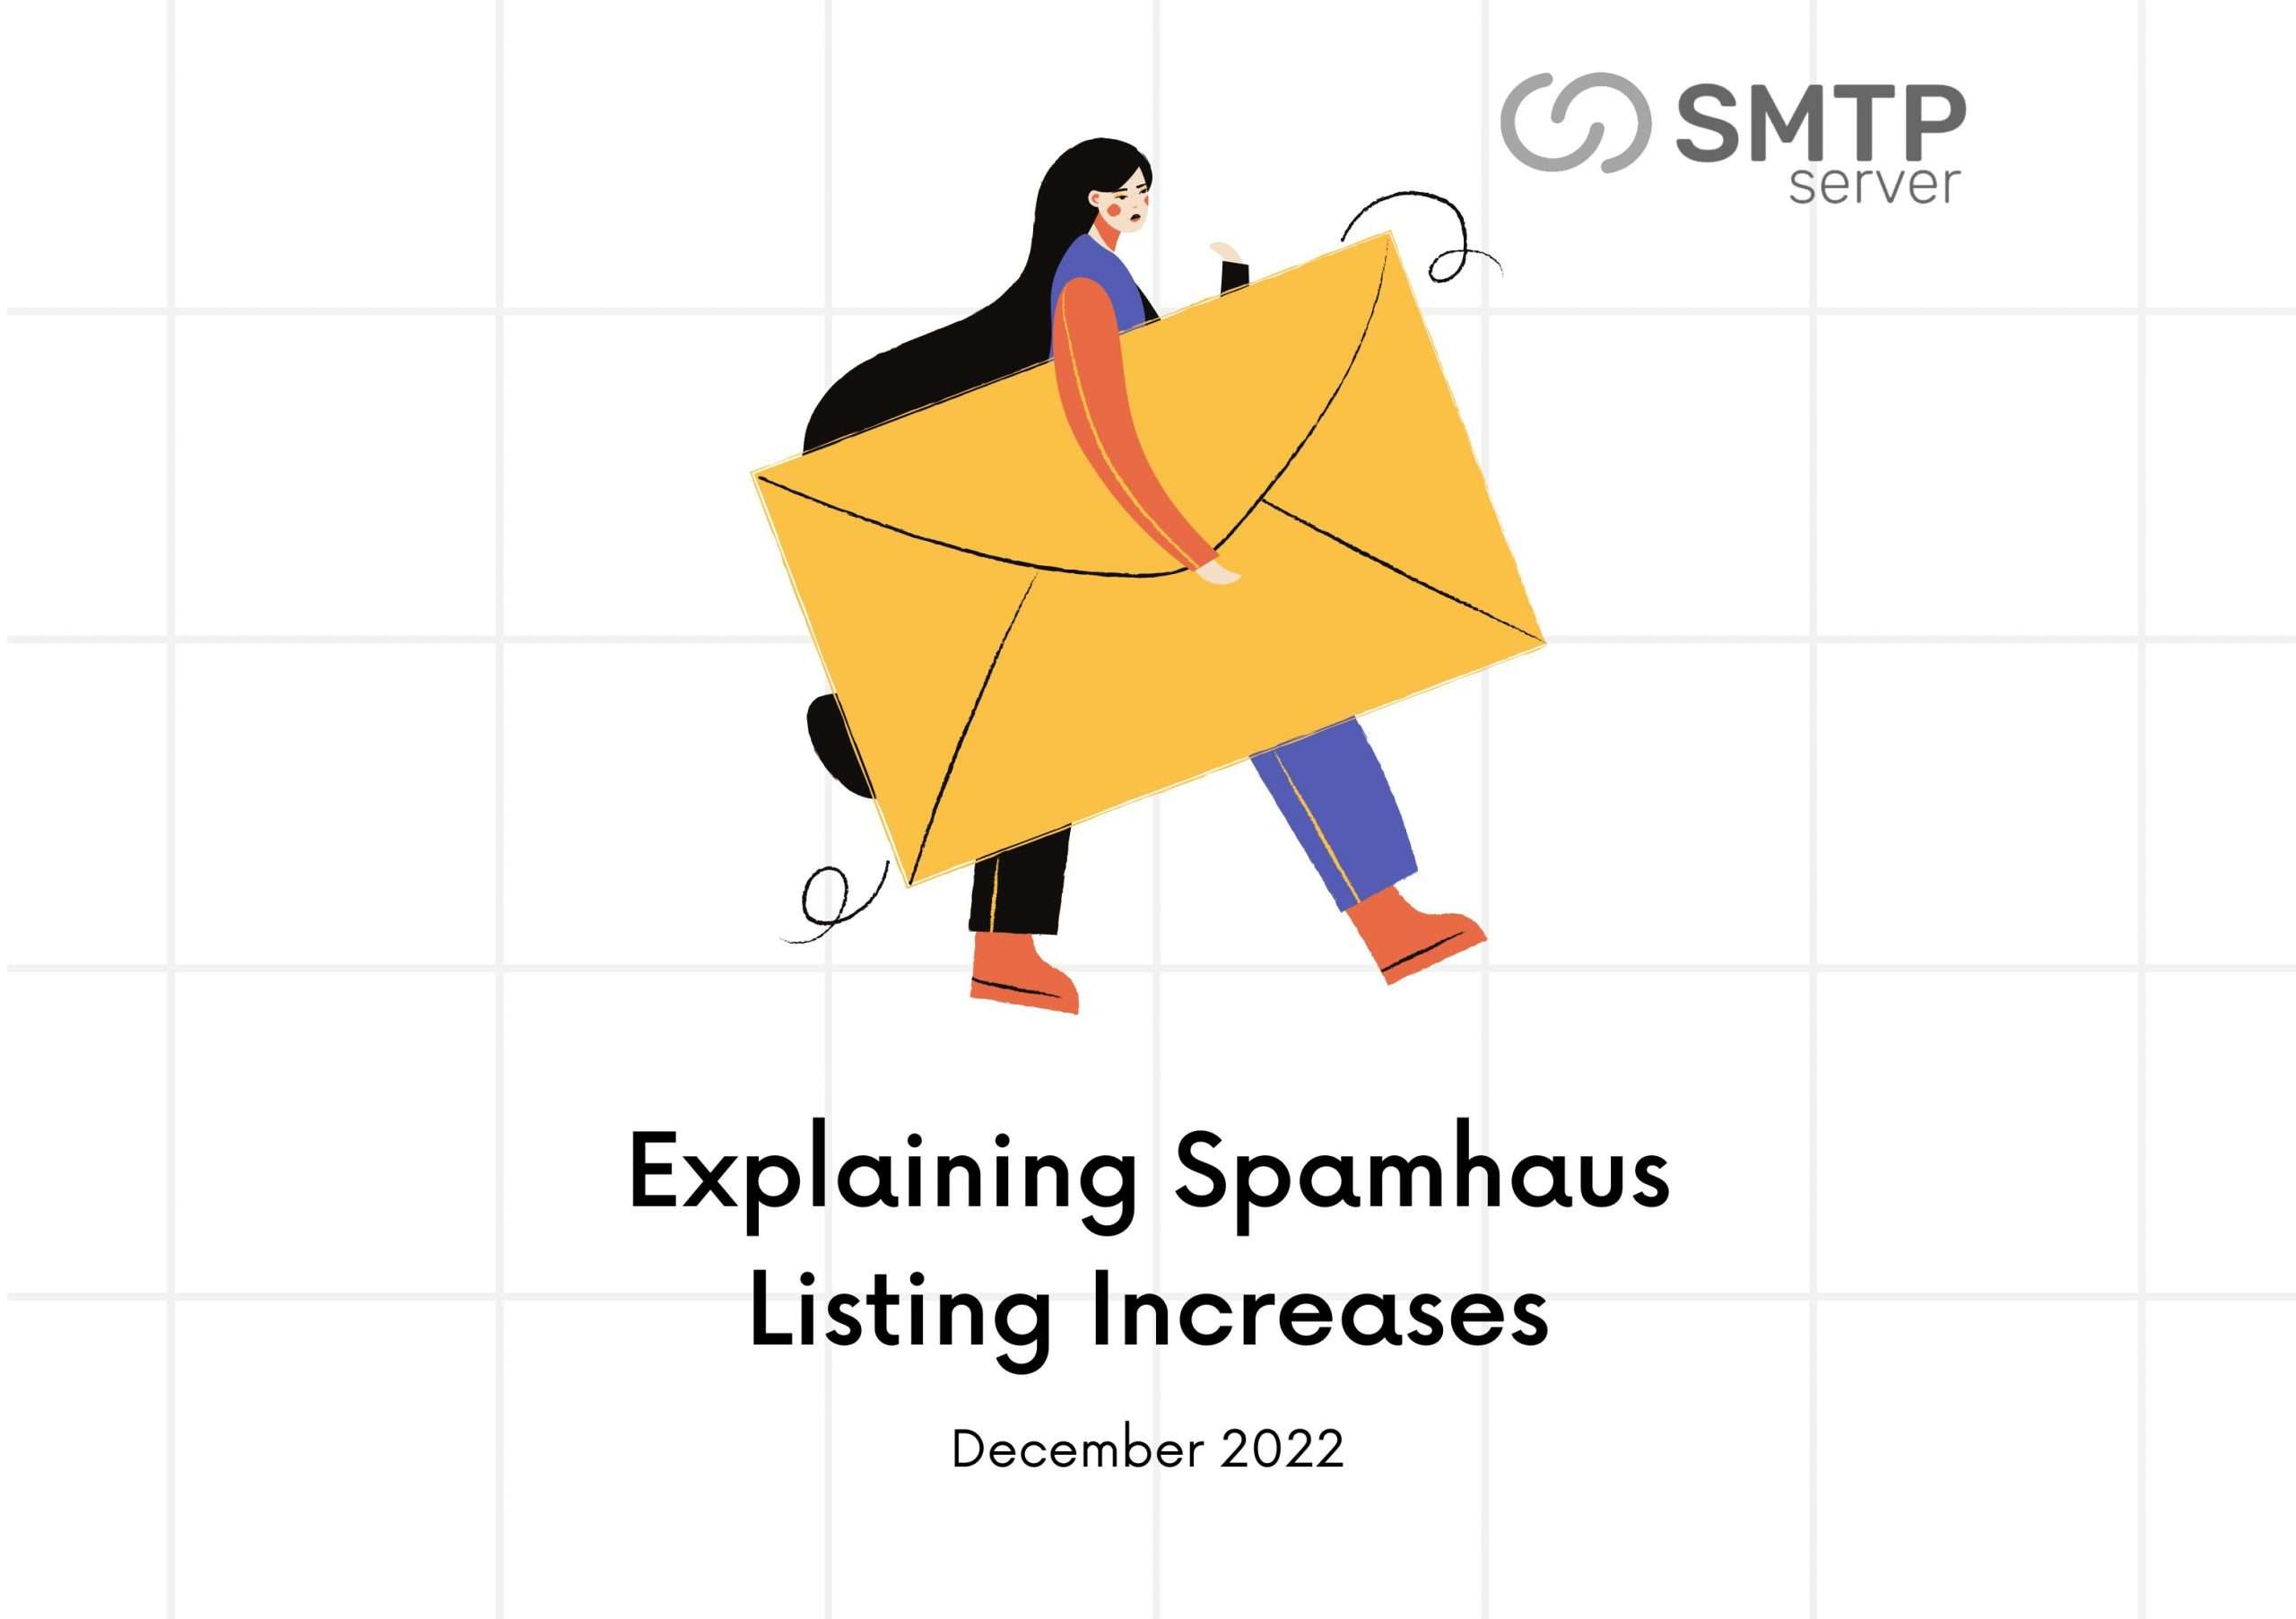 Explaining Spamhaus Listing Increases [December 2022]